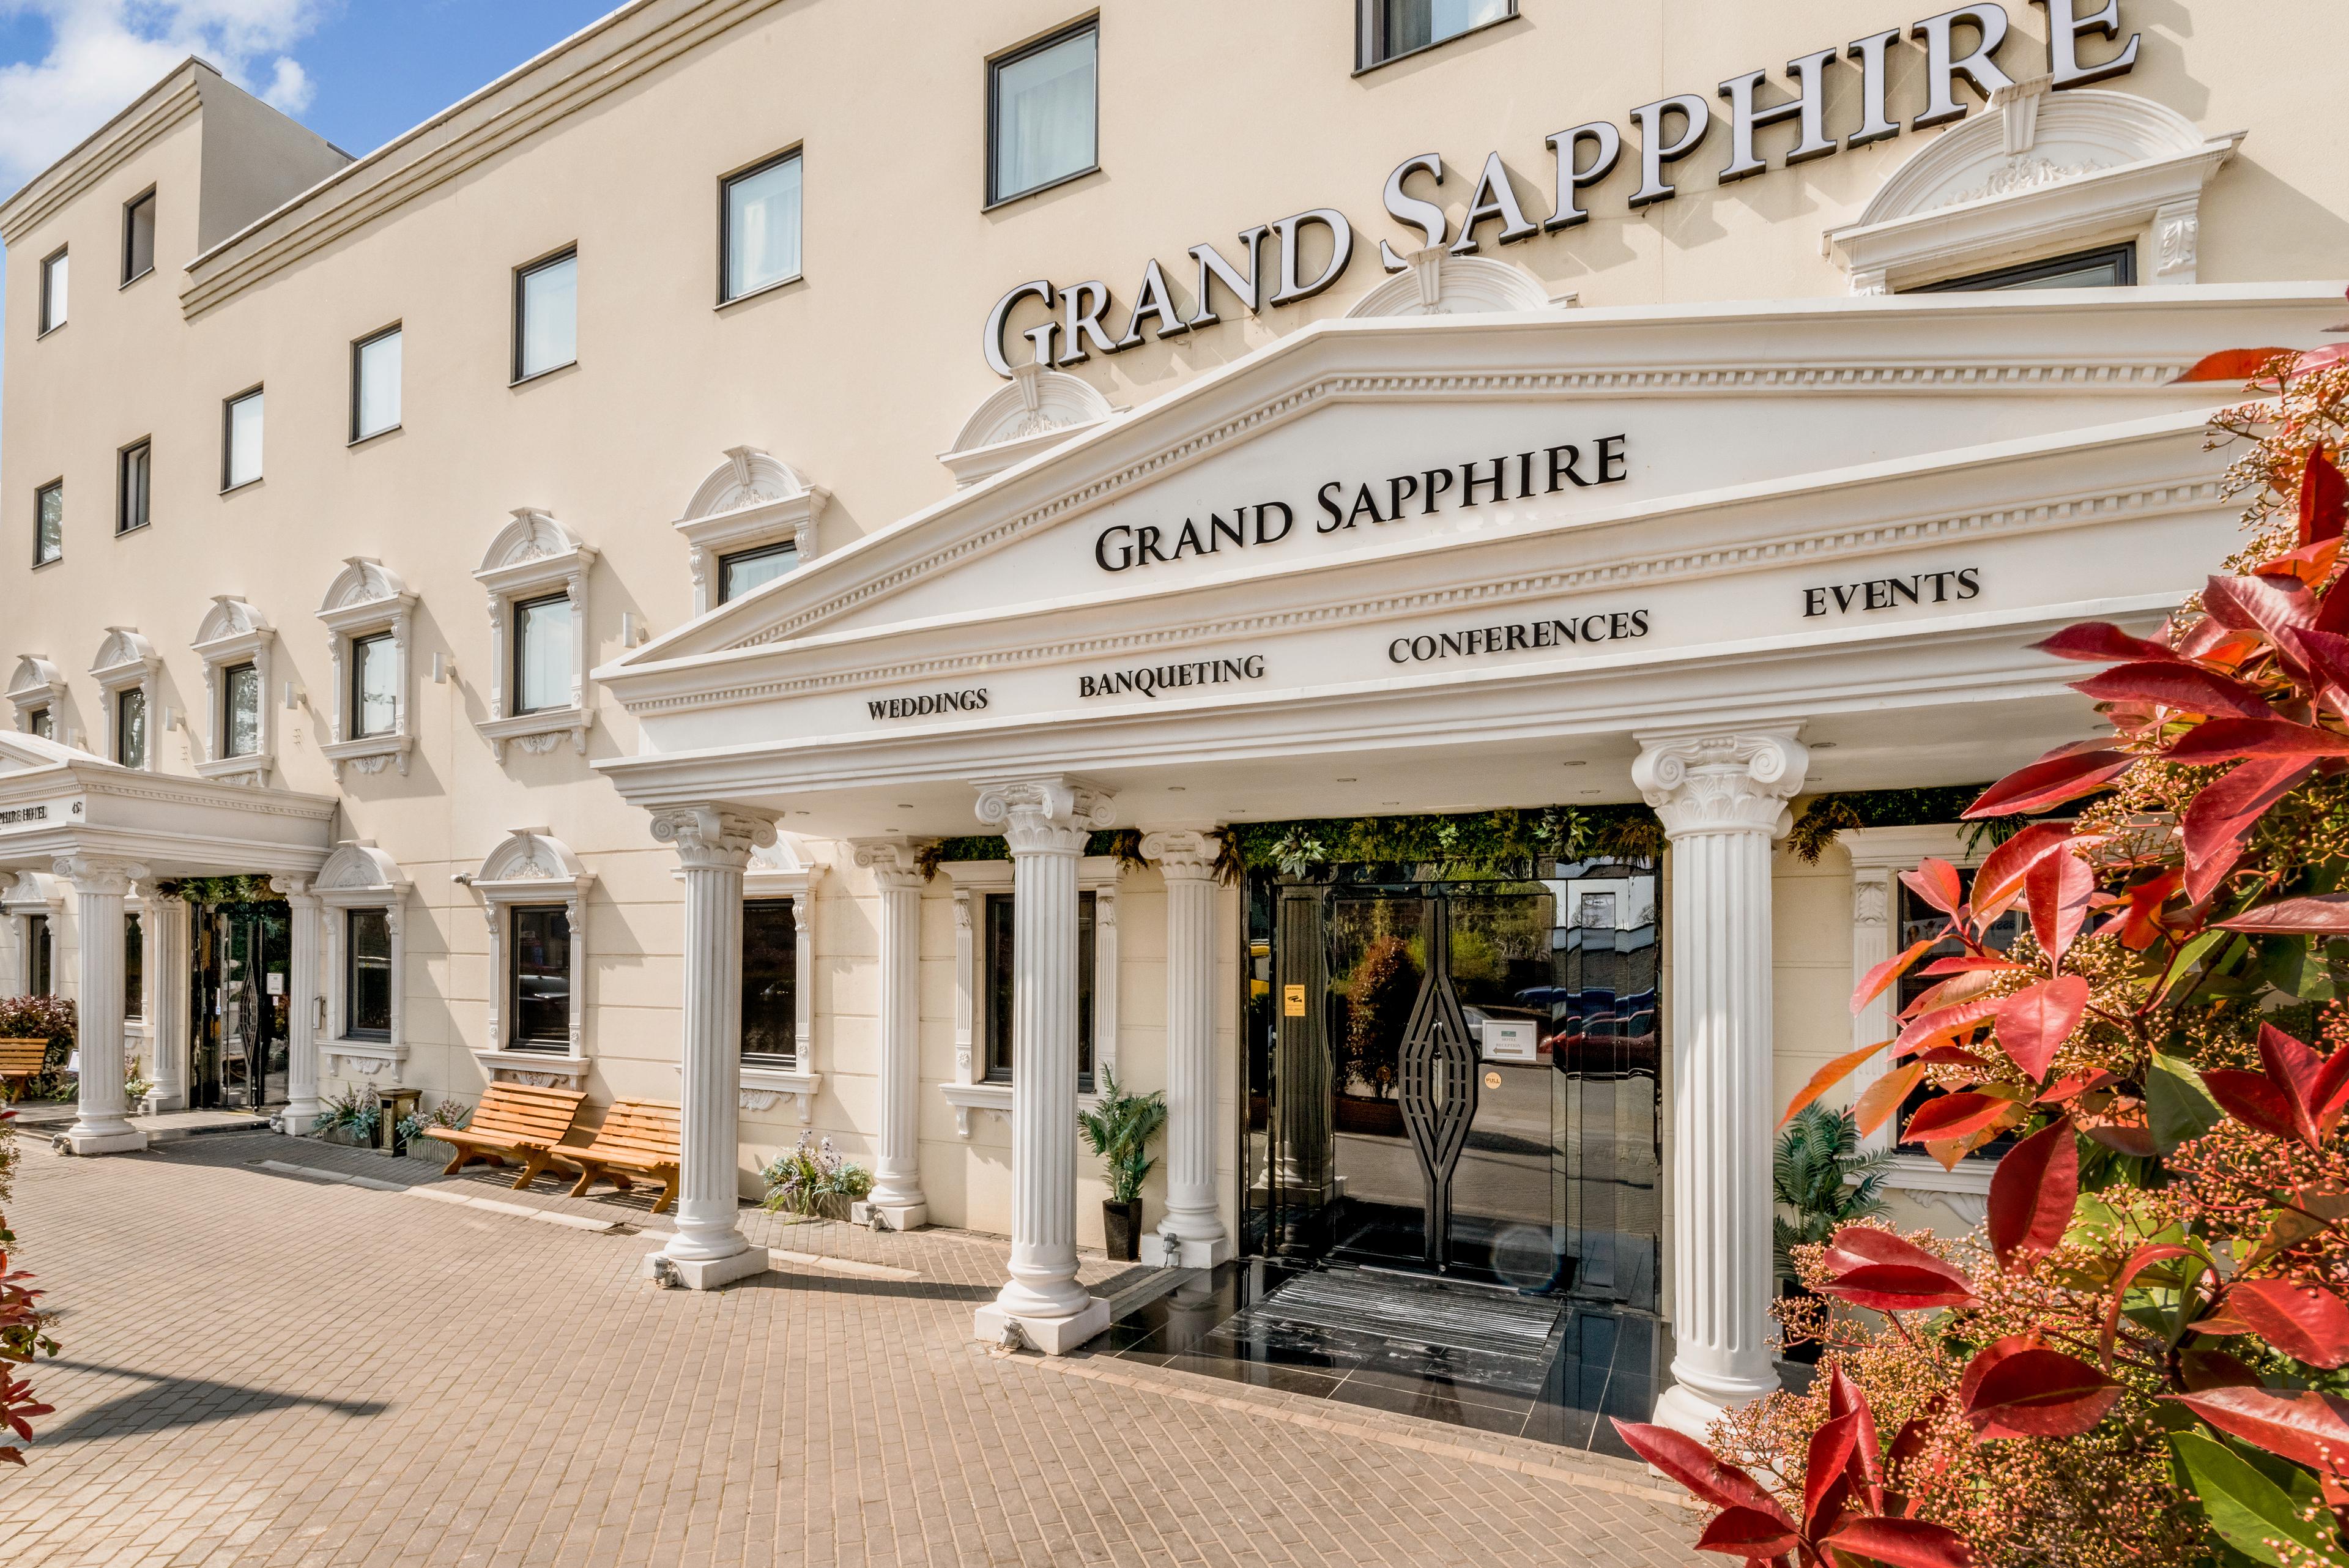 Grand Sapphire Hotel And Banqueting, Rhubarb Suite photo #7